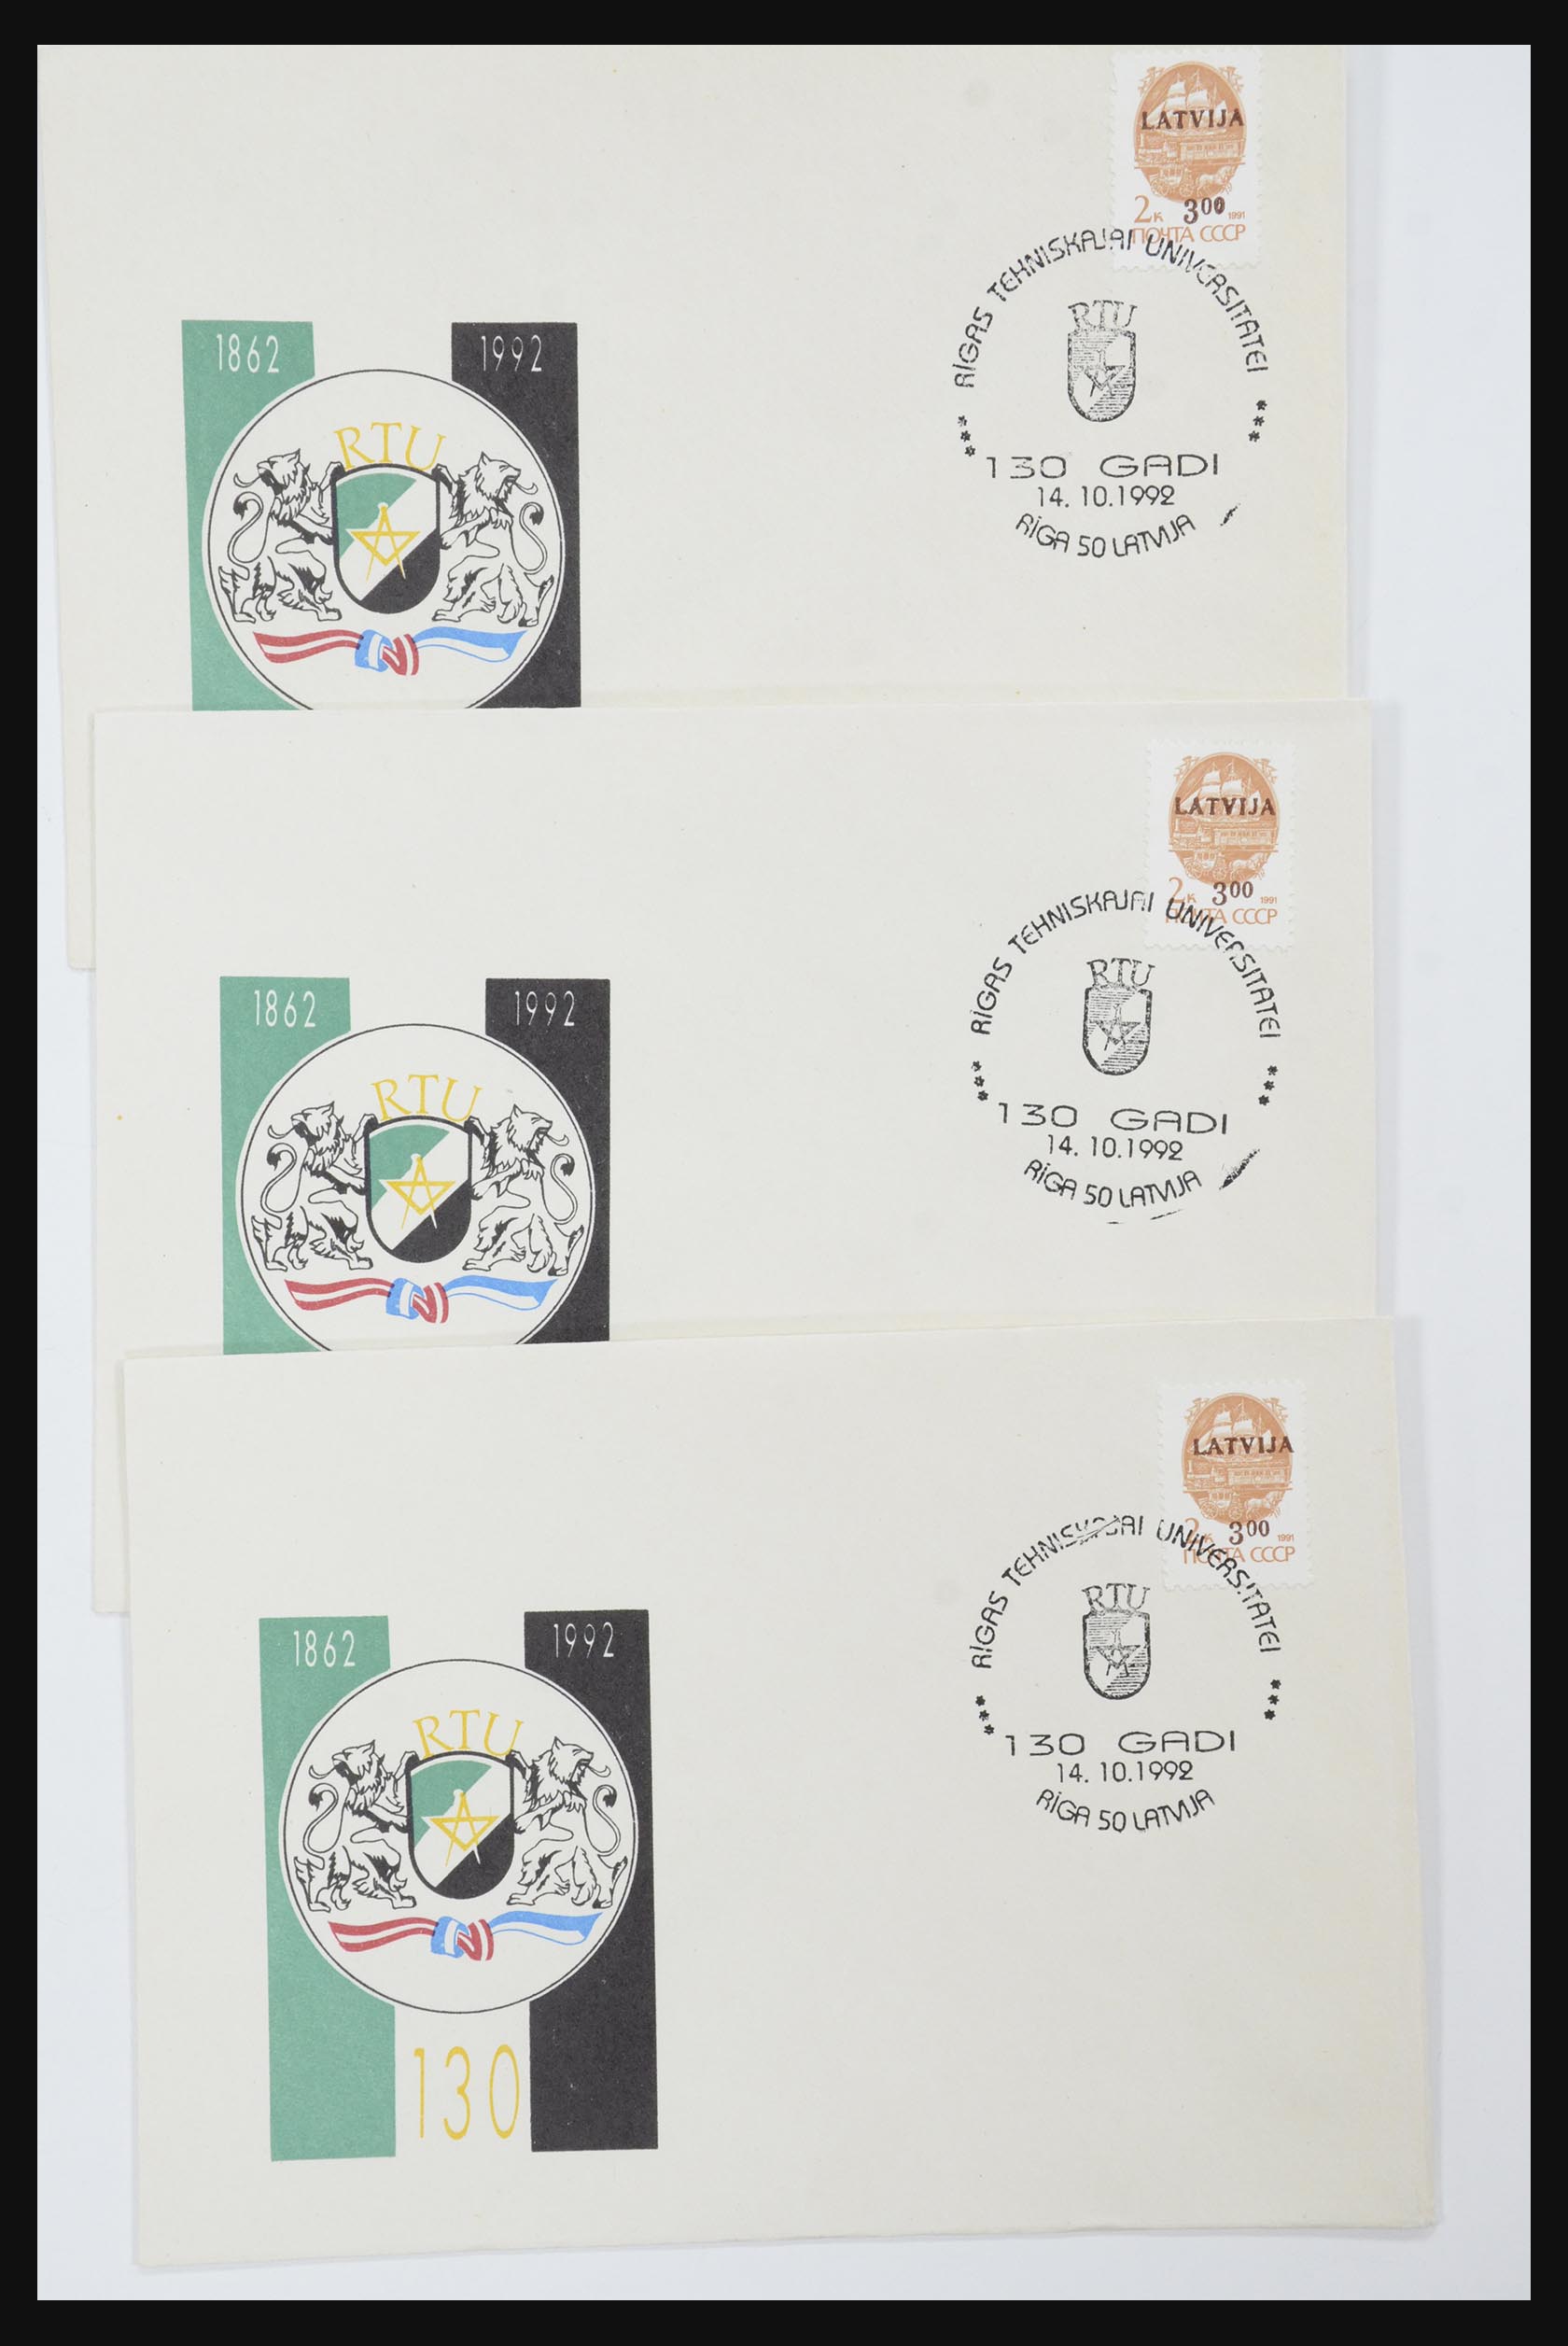 31584 630 - 31584 Latvia covers/FDC's and postal stationeries 1990-1992.